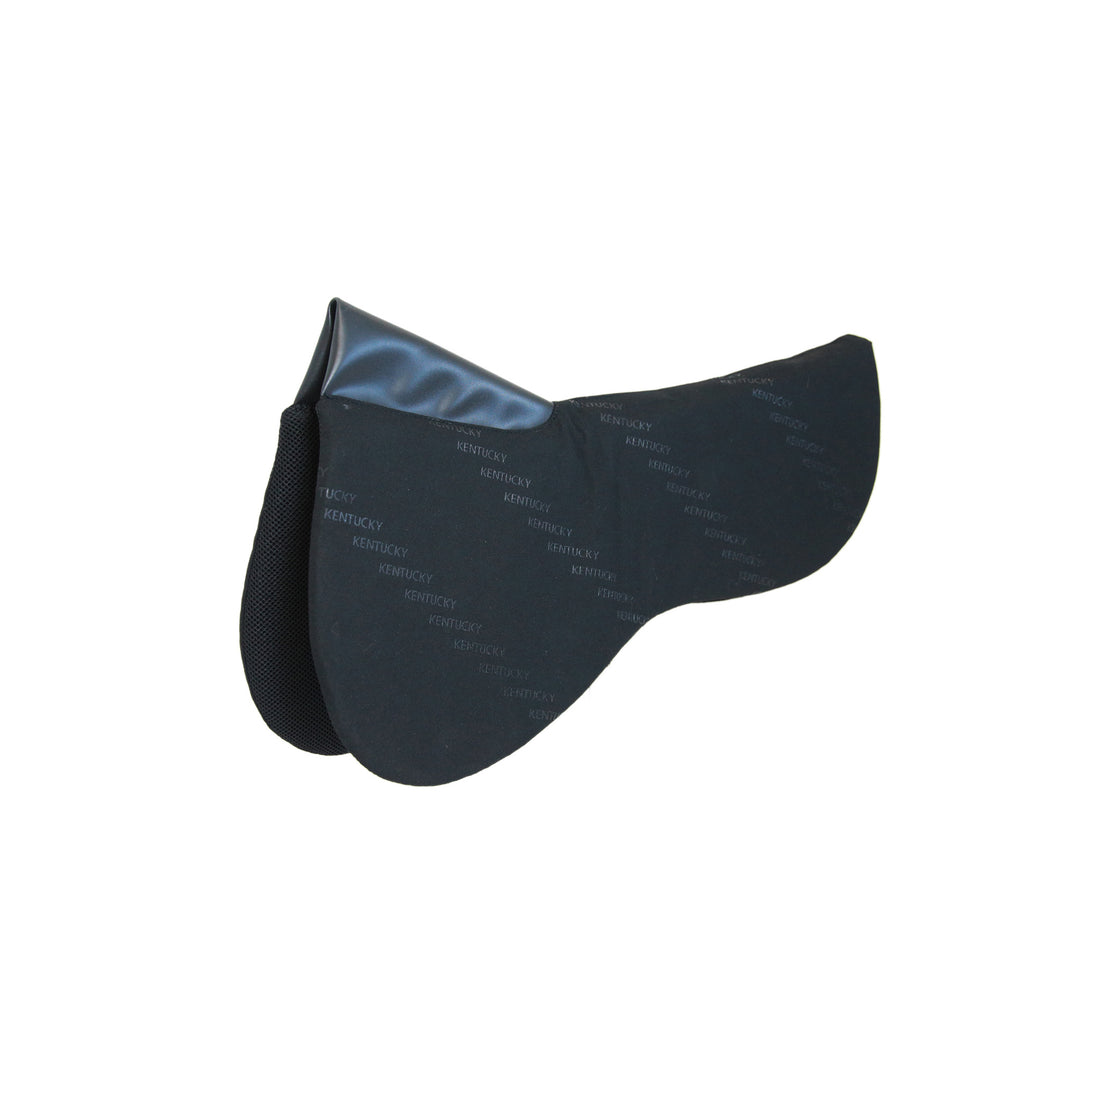 The Kentucky half pad correction is used to improve the fitting and balance of the saddle. This pad is perfect to use for younger horses or horses that change a lot in body shape because you can constantly correct the saddle position on the horse’s back.